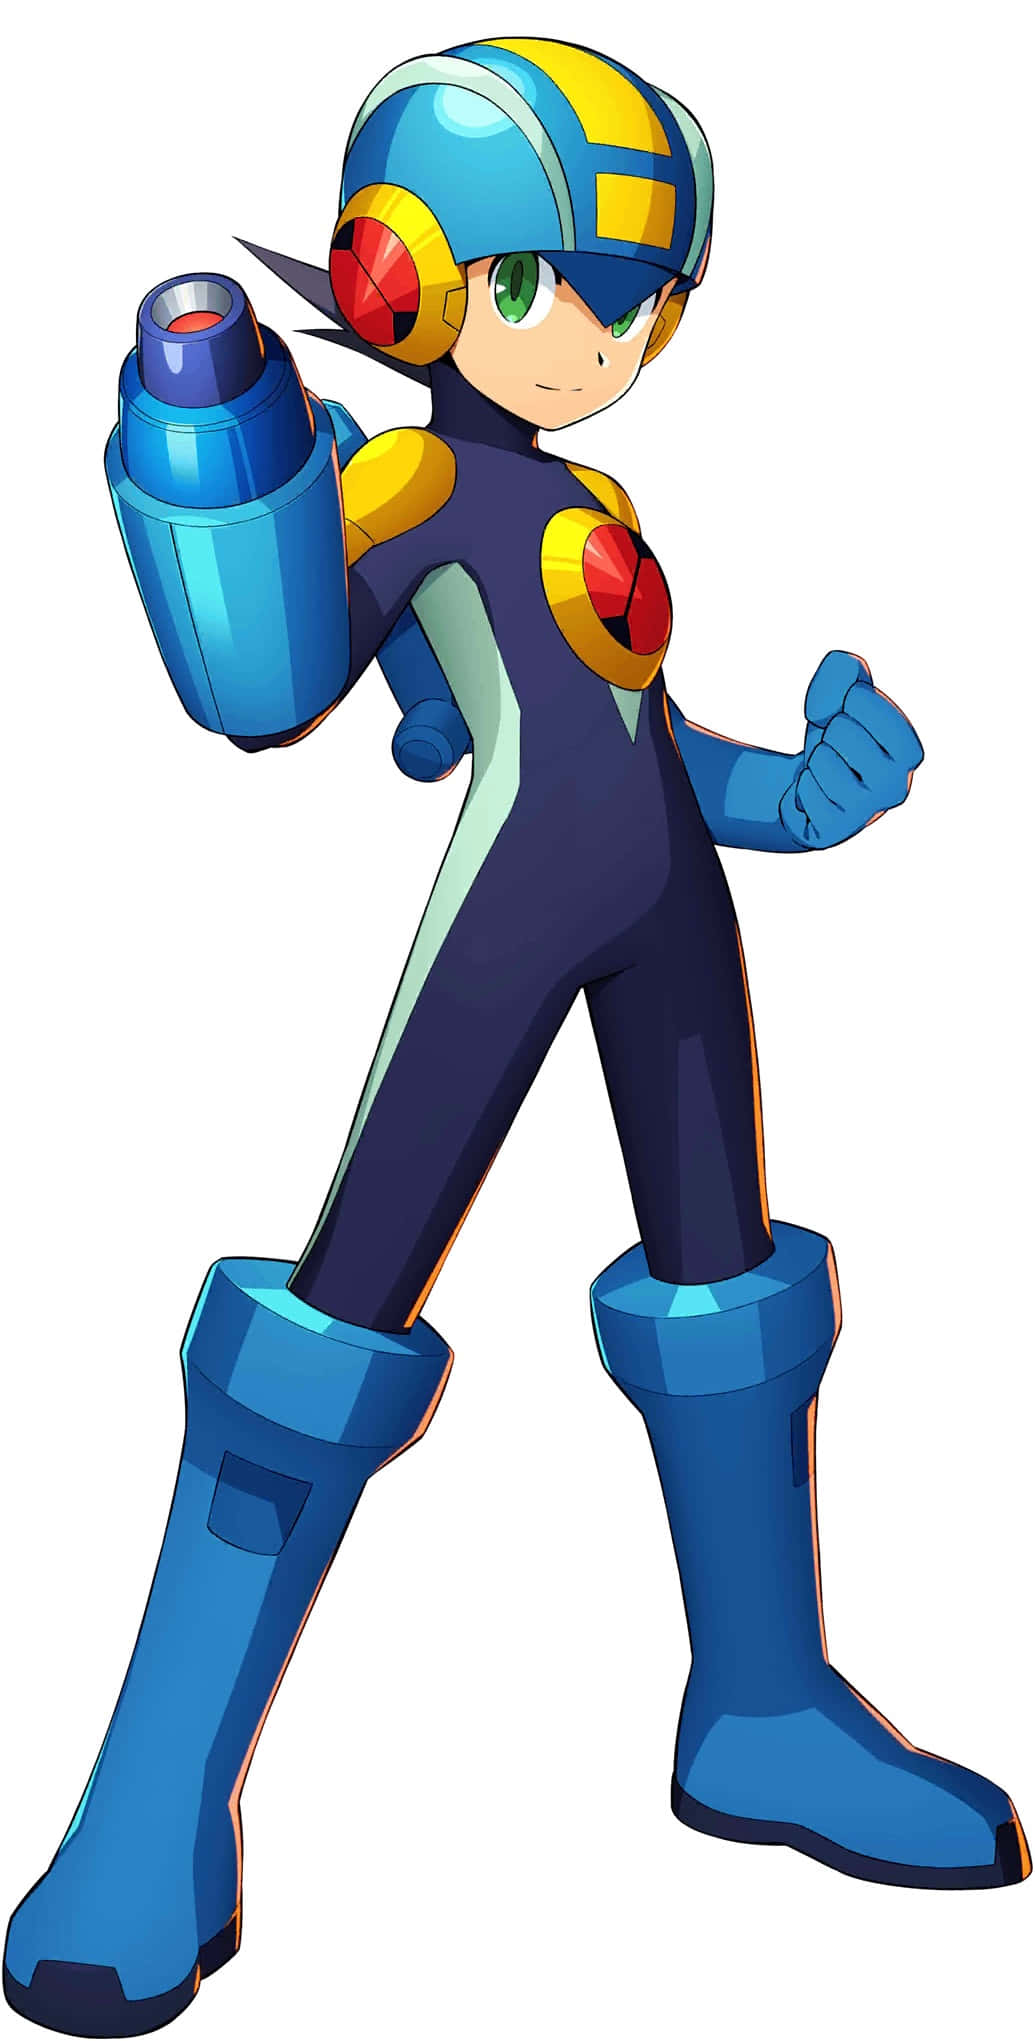 Megaman in Action